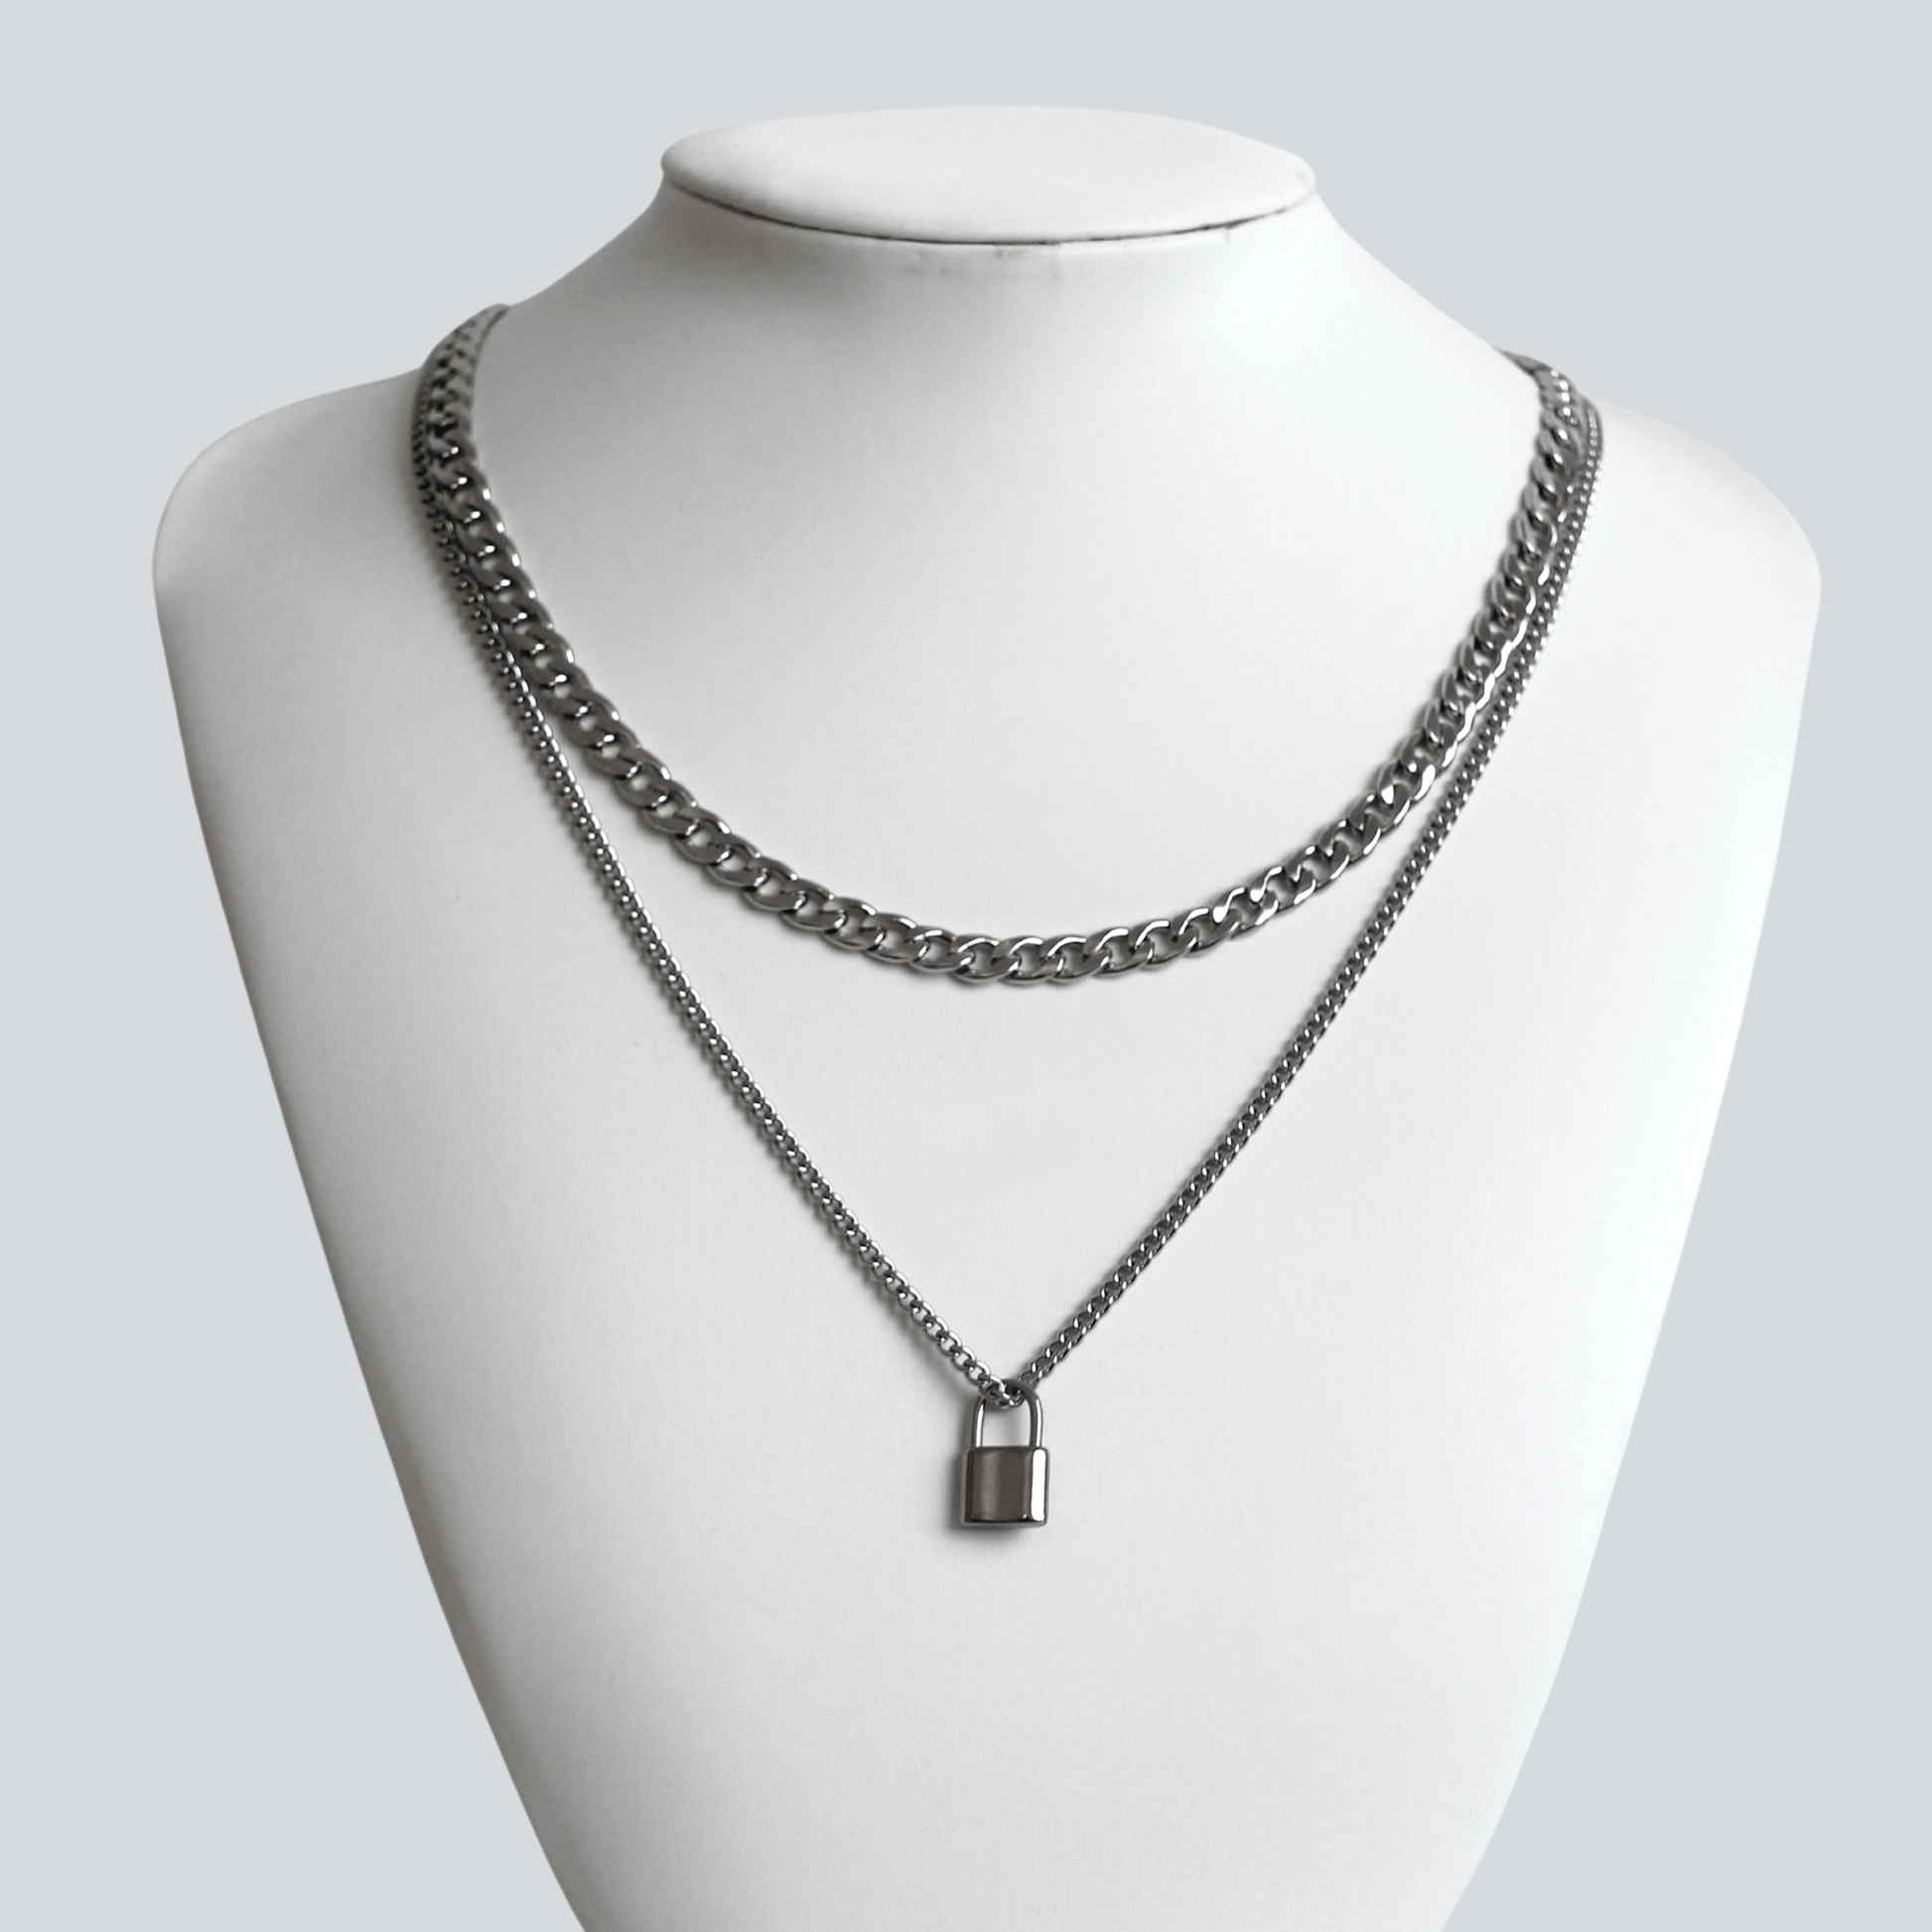 Silver Necklace Set For Men : 6mm Curb Chain and Lock Pendant